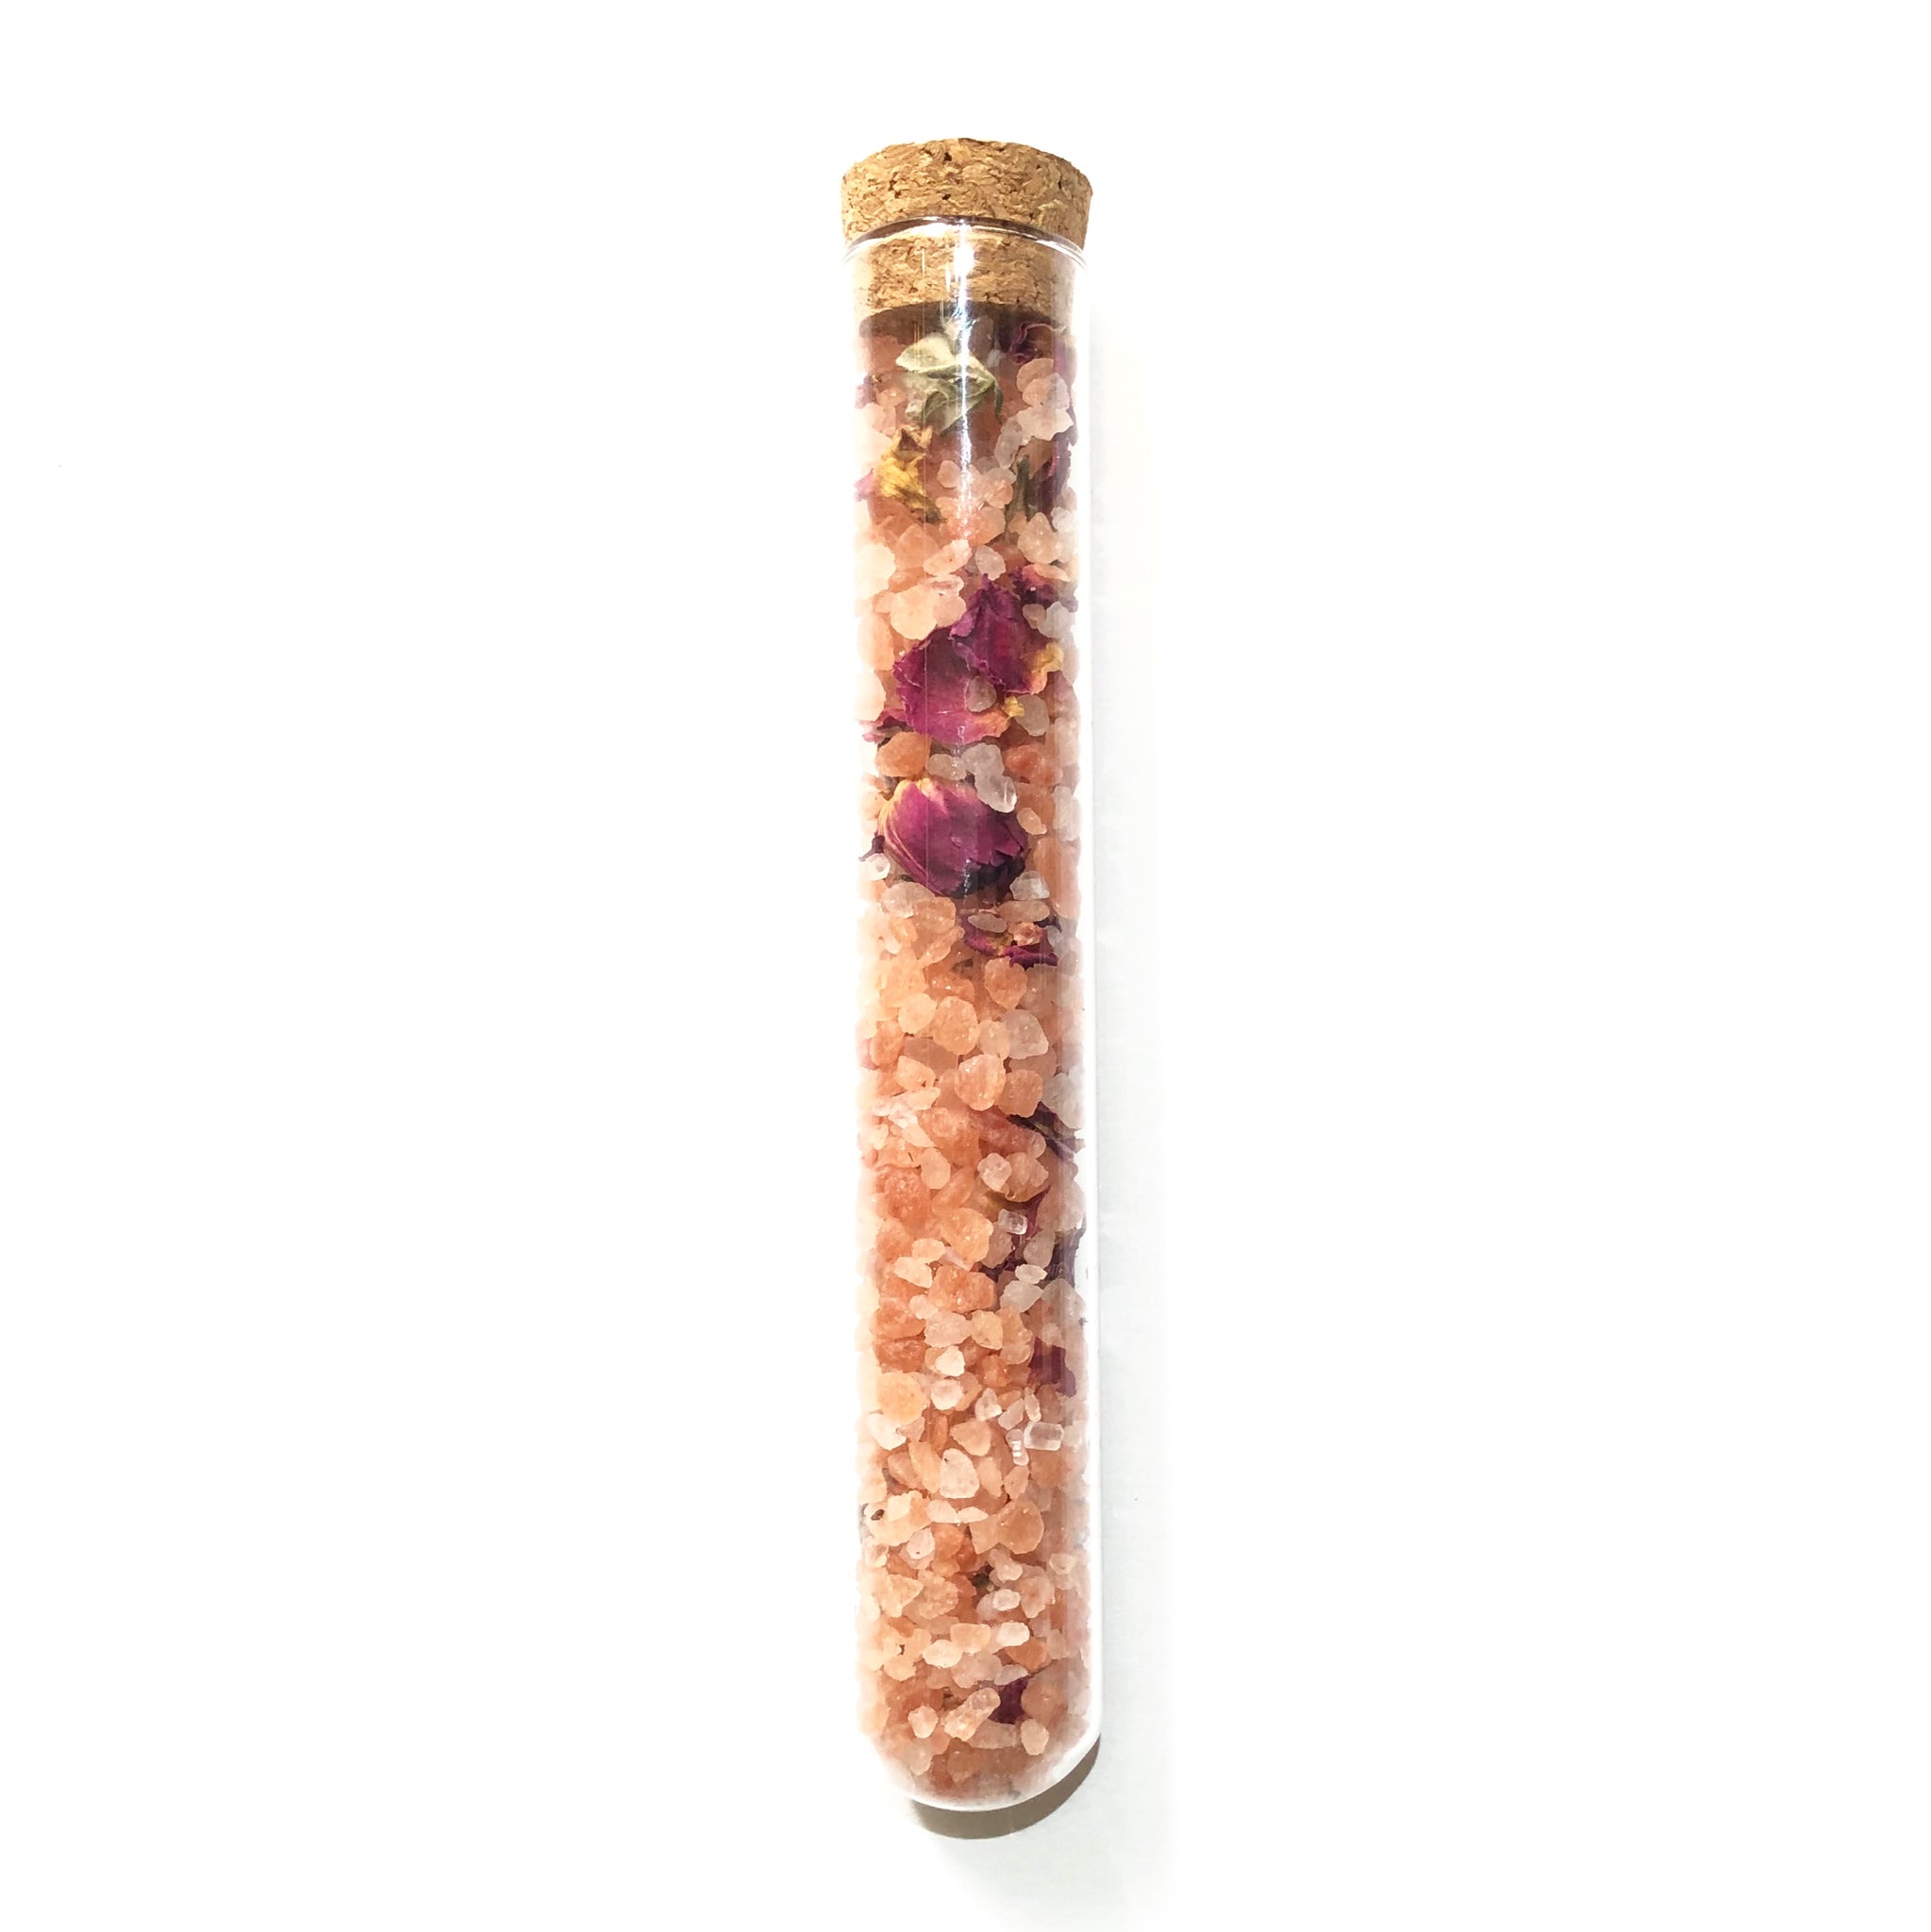 Our Himalayan Bath Salts are paired with red rose petals and scented with organic rose oil!  Himalayan pink salt is known to be rich in over 80 minerals and trace elements, making it the purest form of salt. It is known for its therapeutic properties, promoting relaxation of the body, and for its refreshing and energizing effects.  Rose oil is known to hydrate dry skin, clear acne, reduce signs of aging, minimize the appearance of scars, and help with skin conditions such as eczema and rosacea.